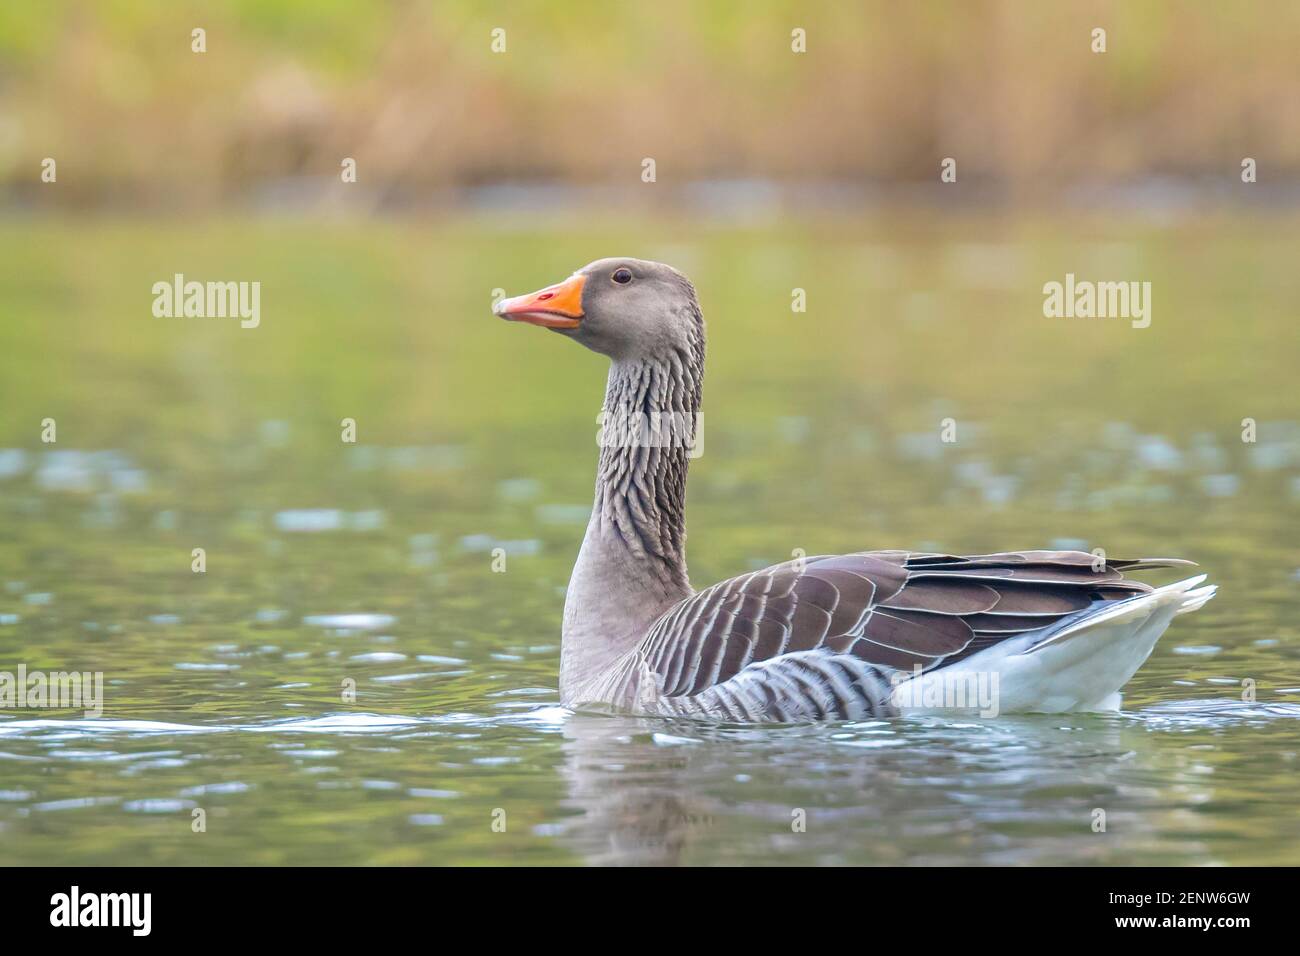 Closeup of a Greylag goose, Anser Anser, swimming in water Stock Photo